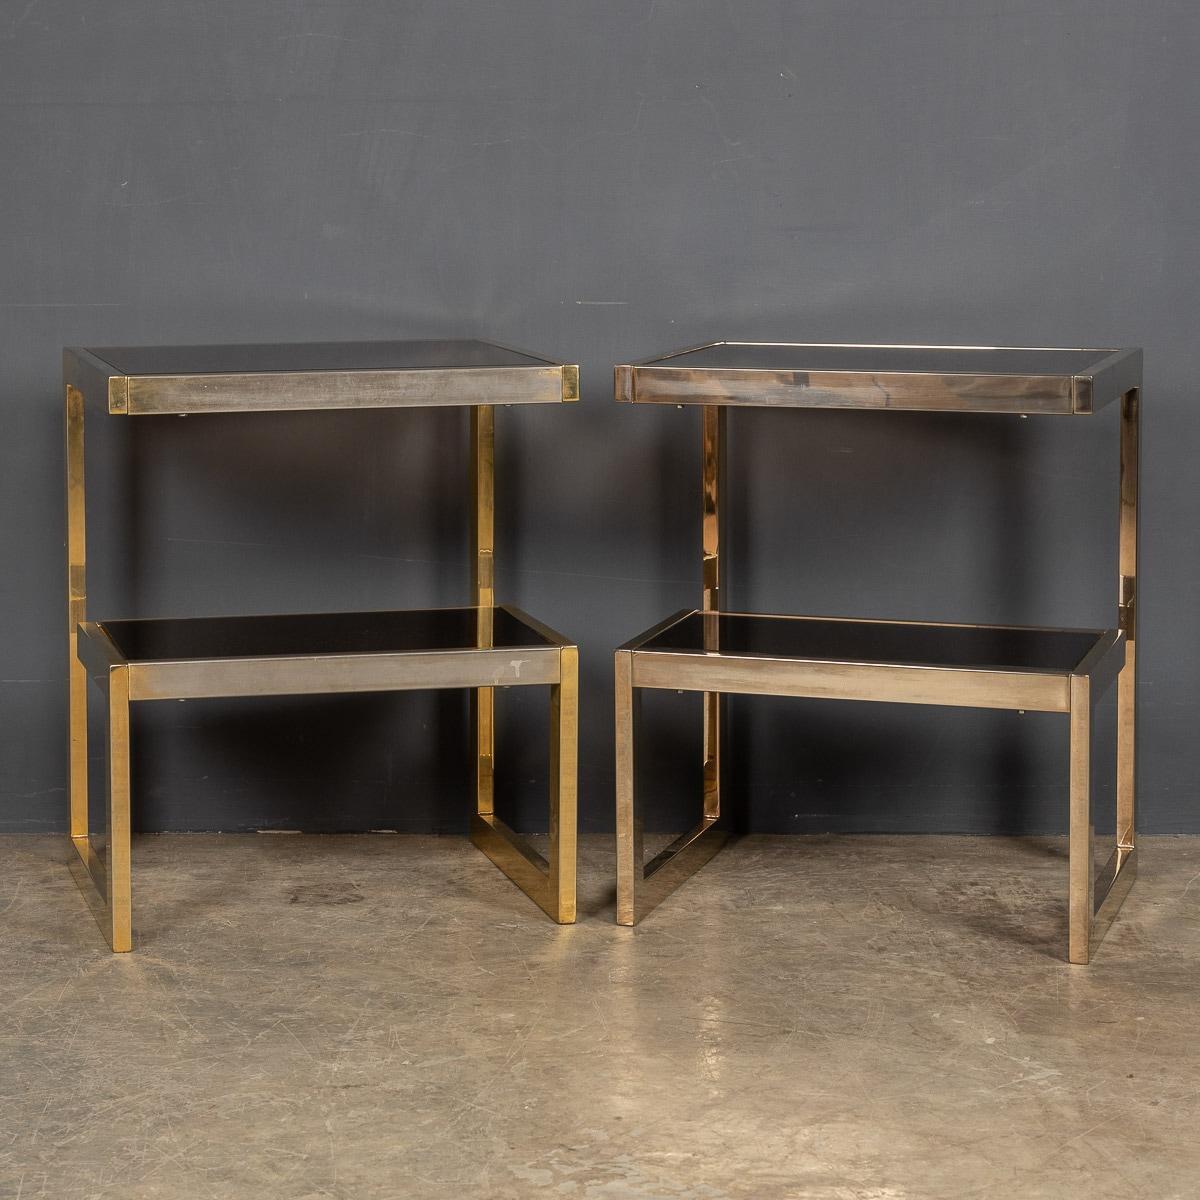 A pair of small chrome G tables by Belgo, the lower shelf with mirrored glass and the upper surface in classic smoked glass. A wonderful addition to any interior, that will undoubtedly add style and sophistication.

CONDITION
In good condition -